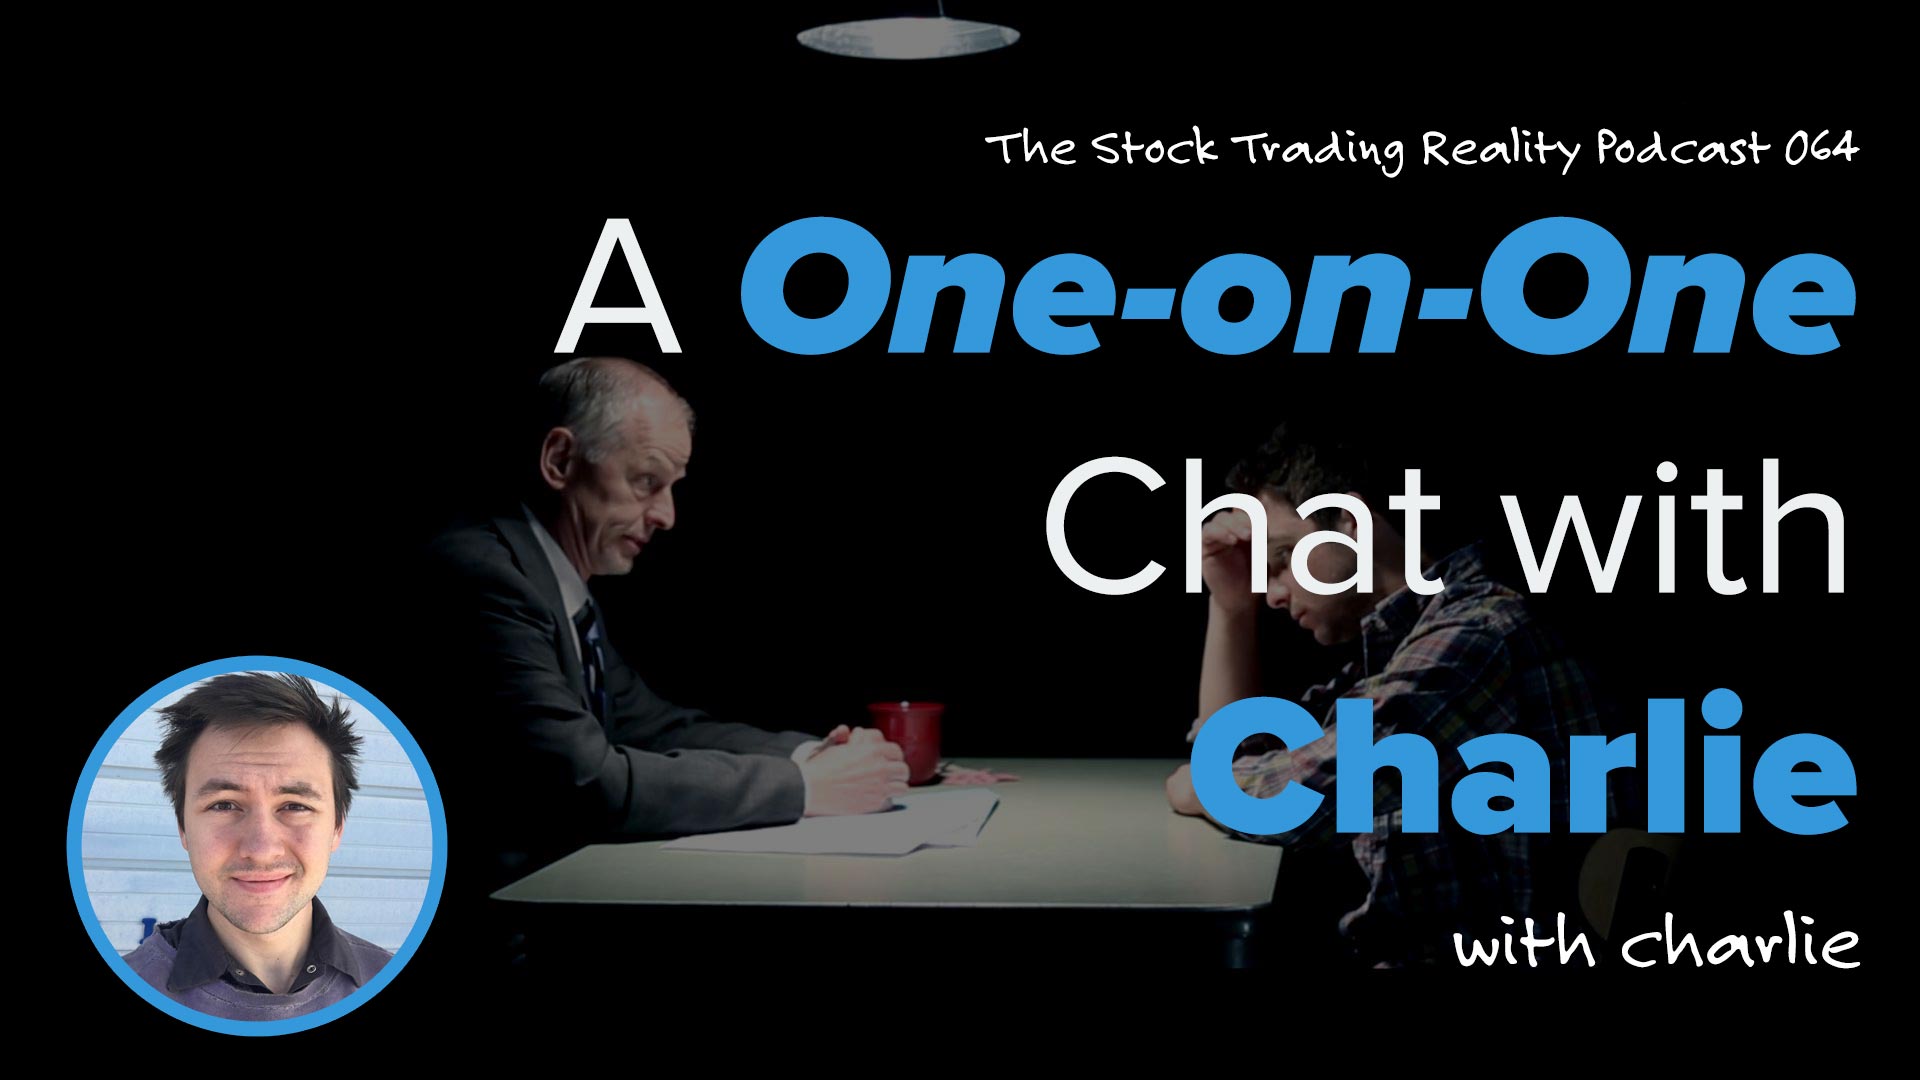 STR 064: A One-on-One Chat with Charlie